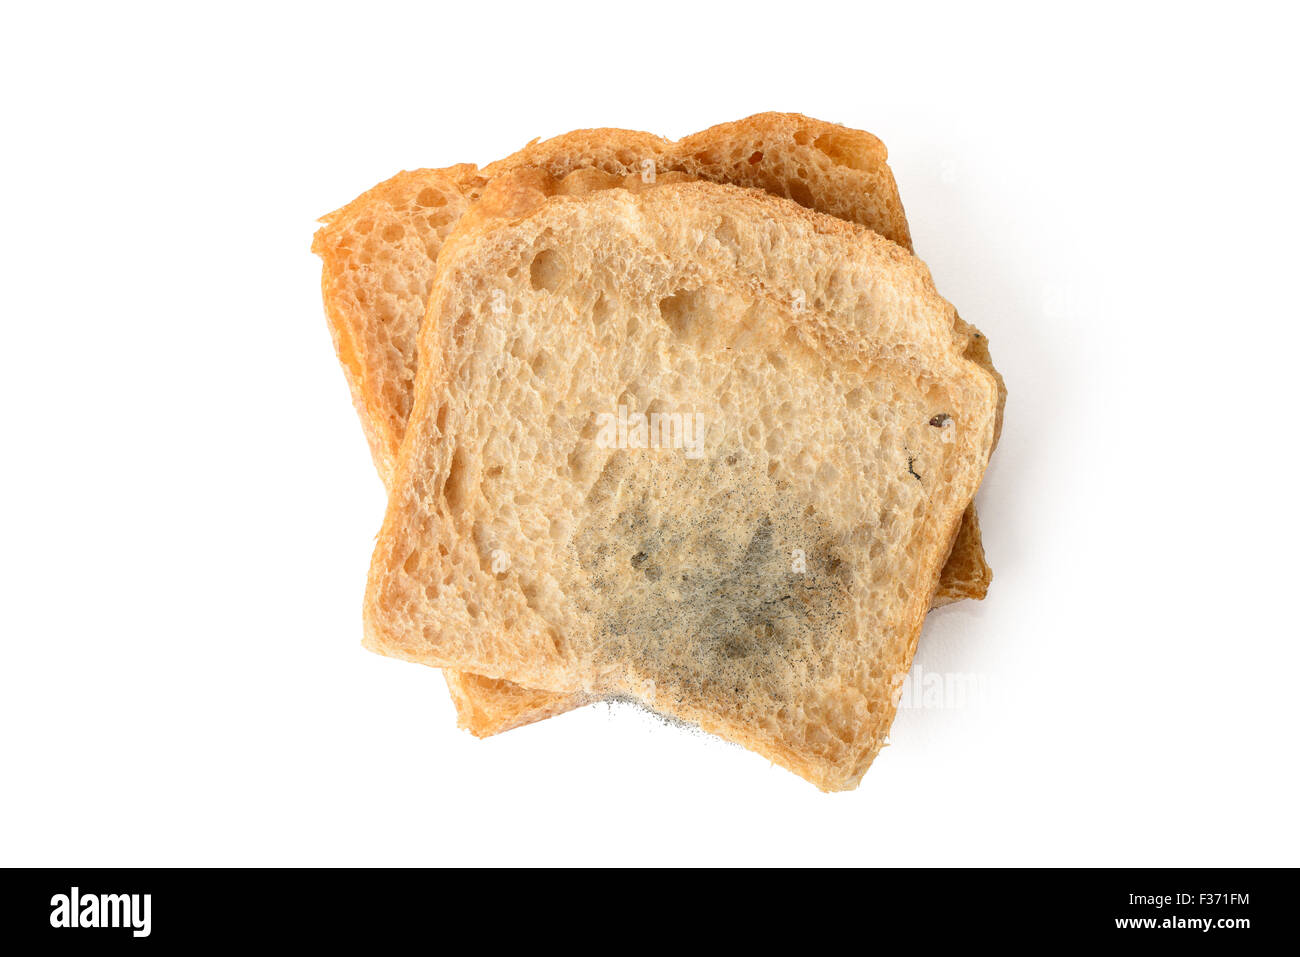 Bread with mould, composite image - Stock Image - F025/0148 - Science Photo  Library